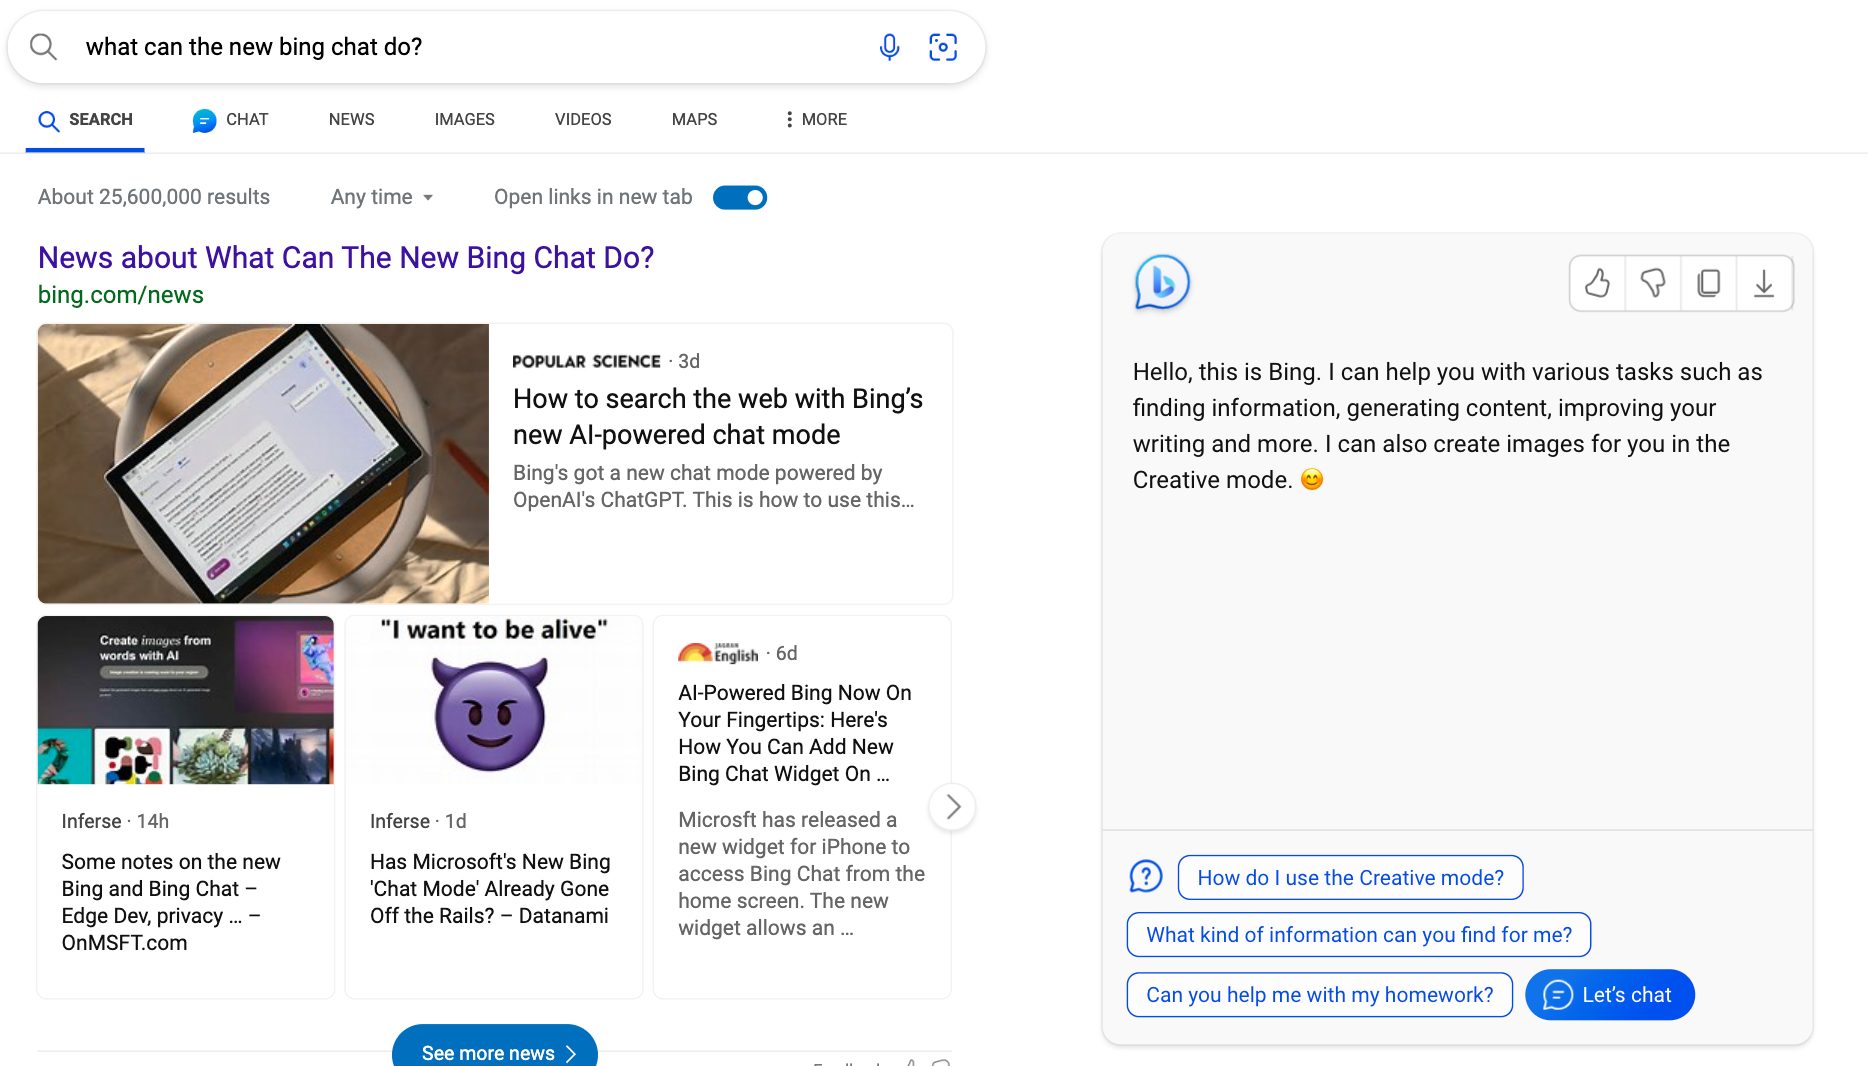 Bing chat in search